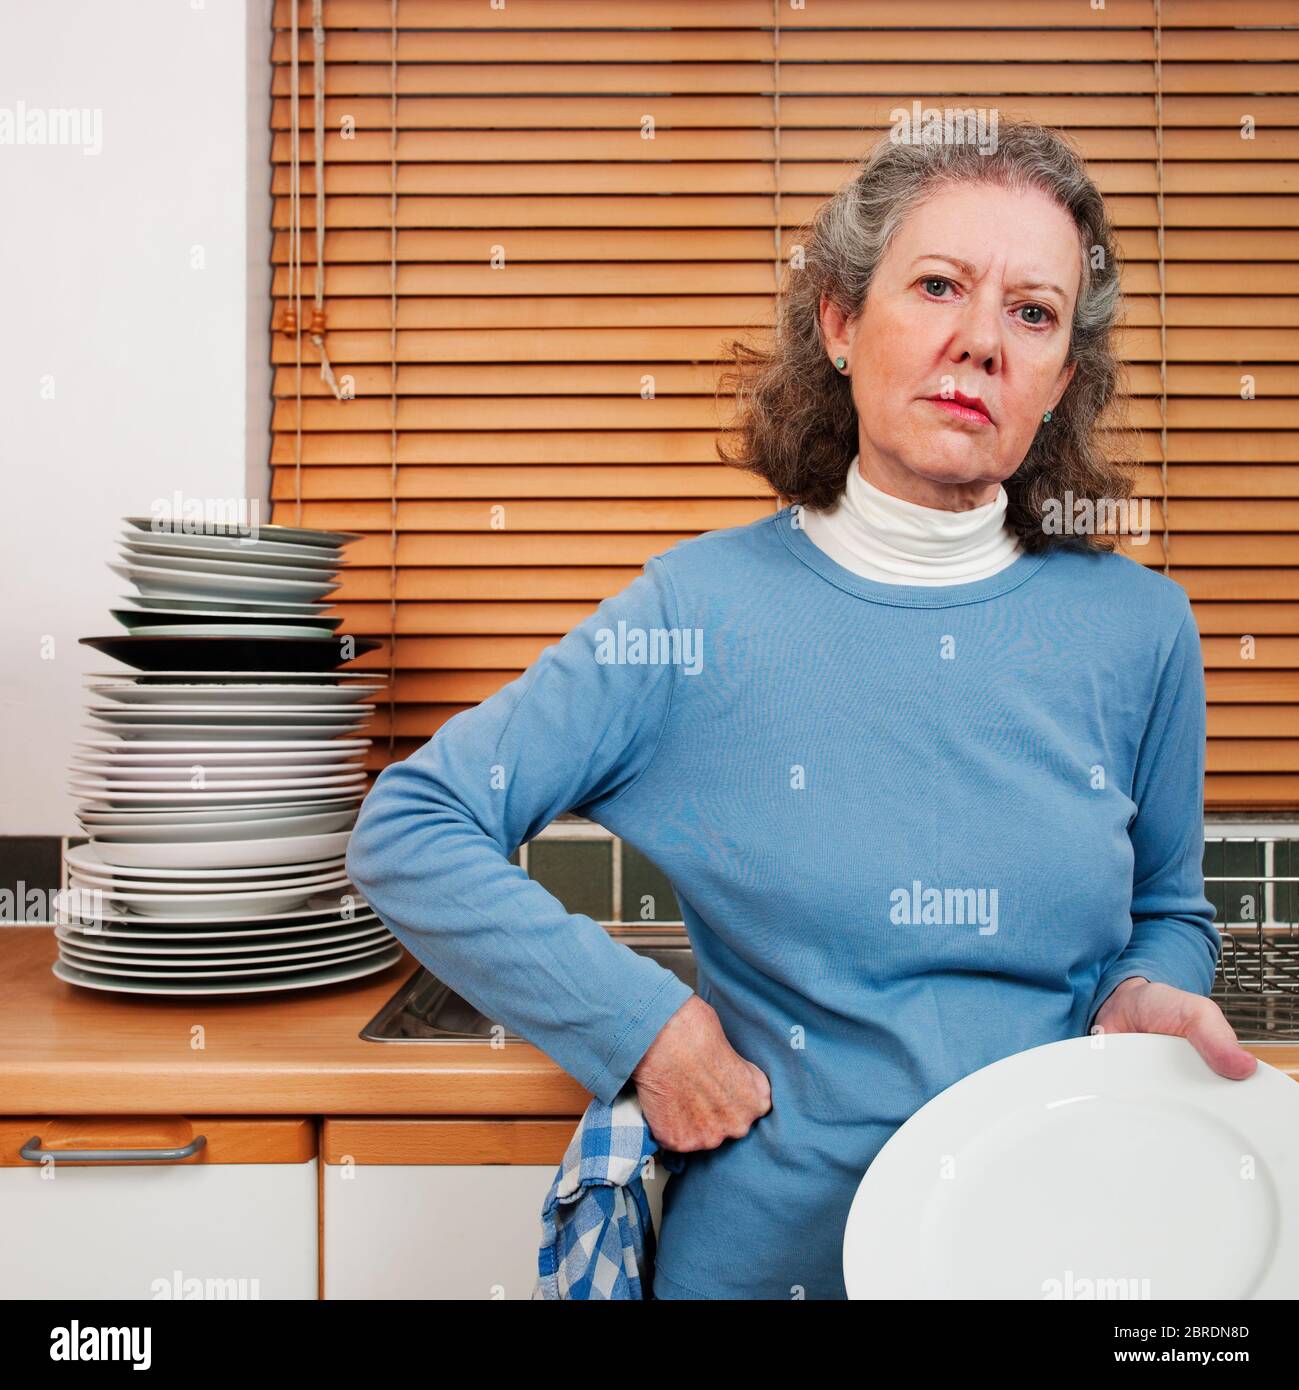 Woman hand washing large pile of plates, looking bored Stock Photo